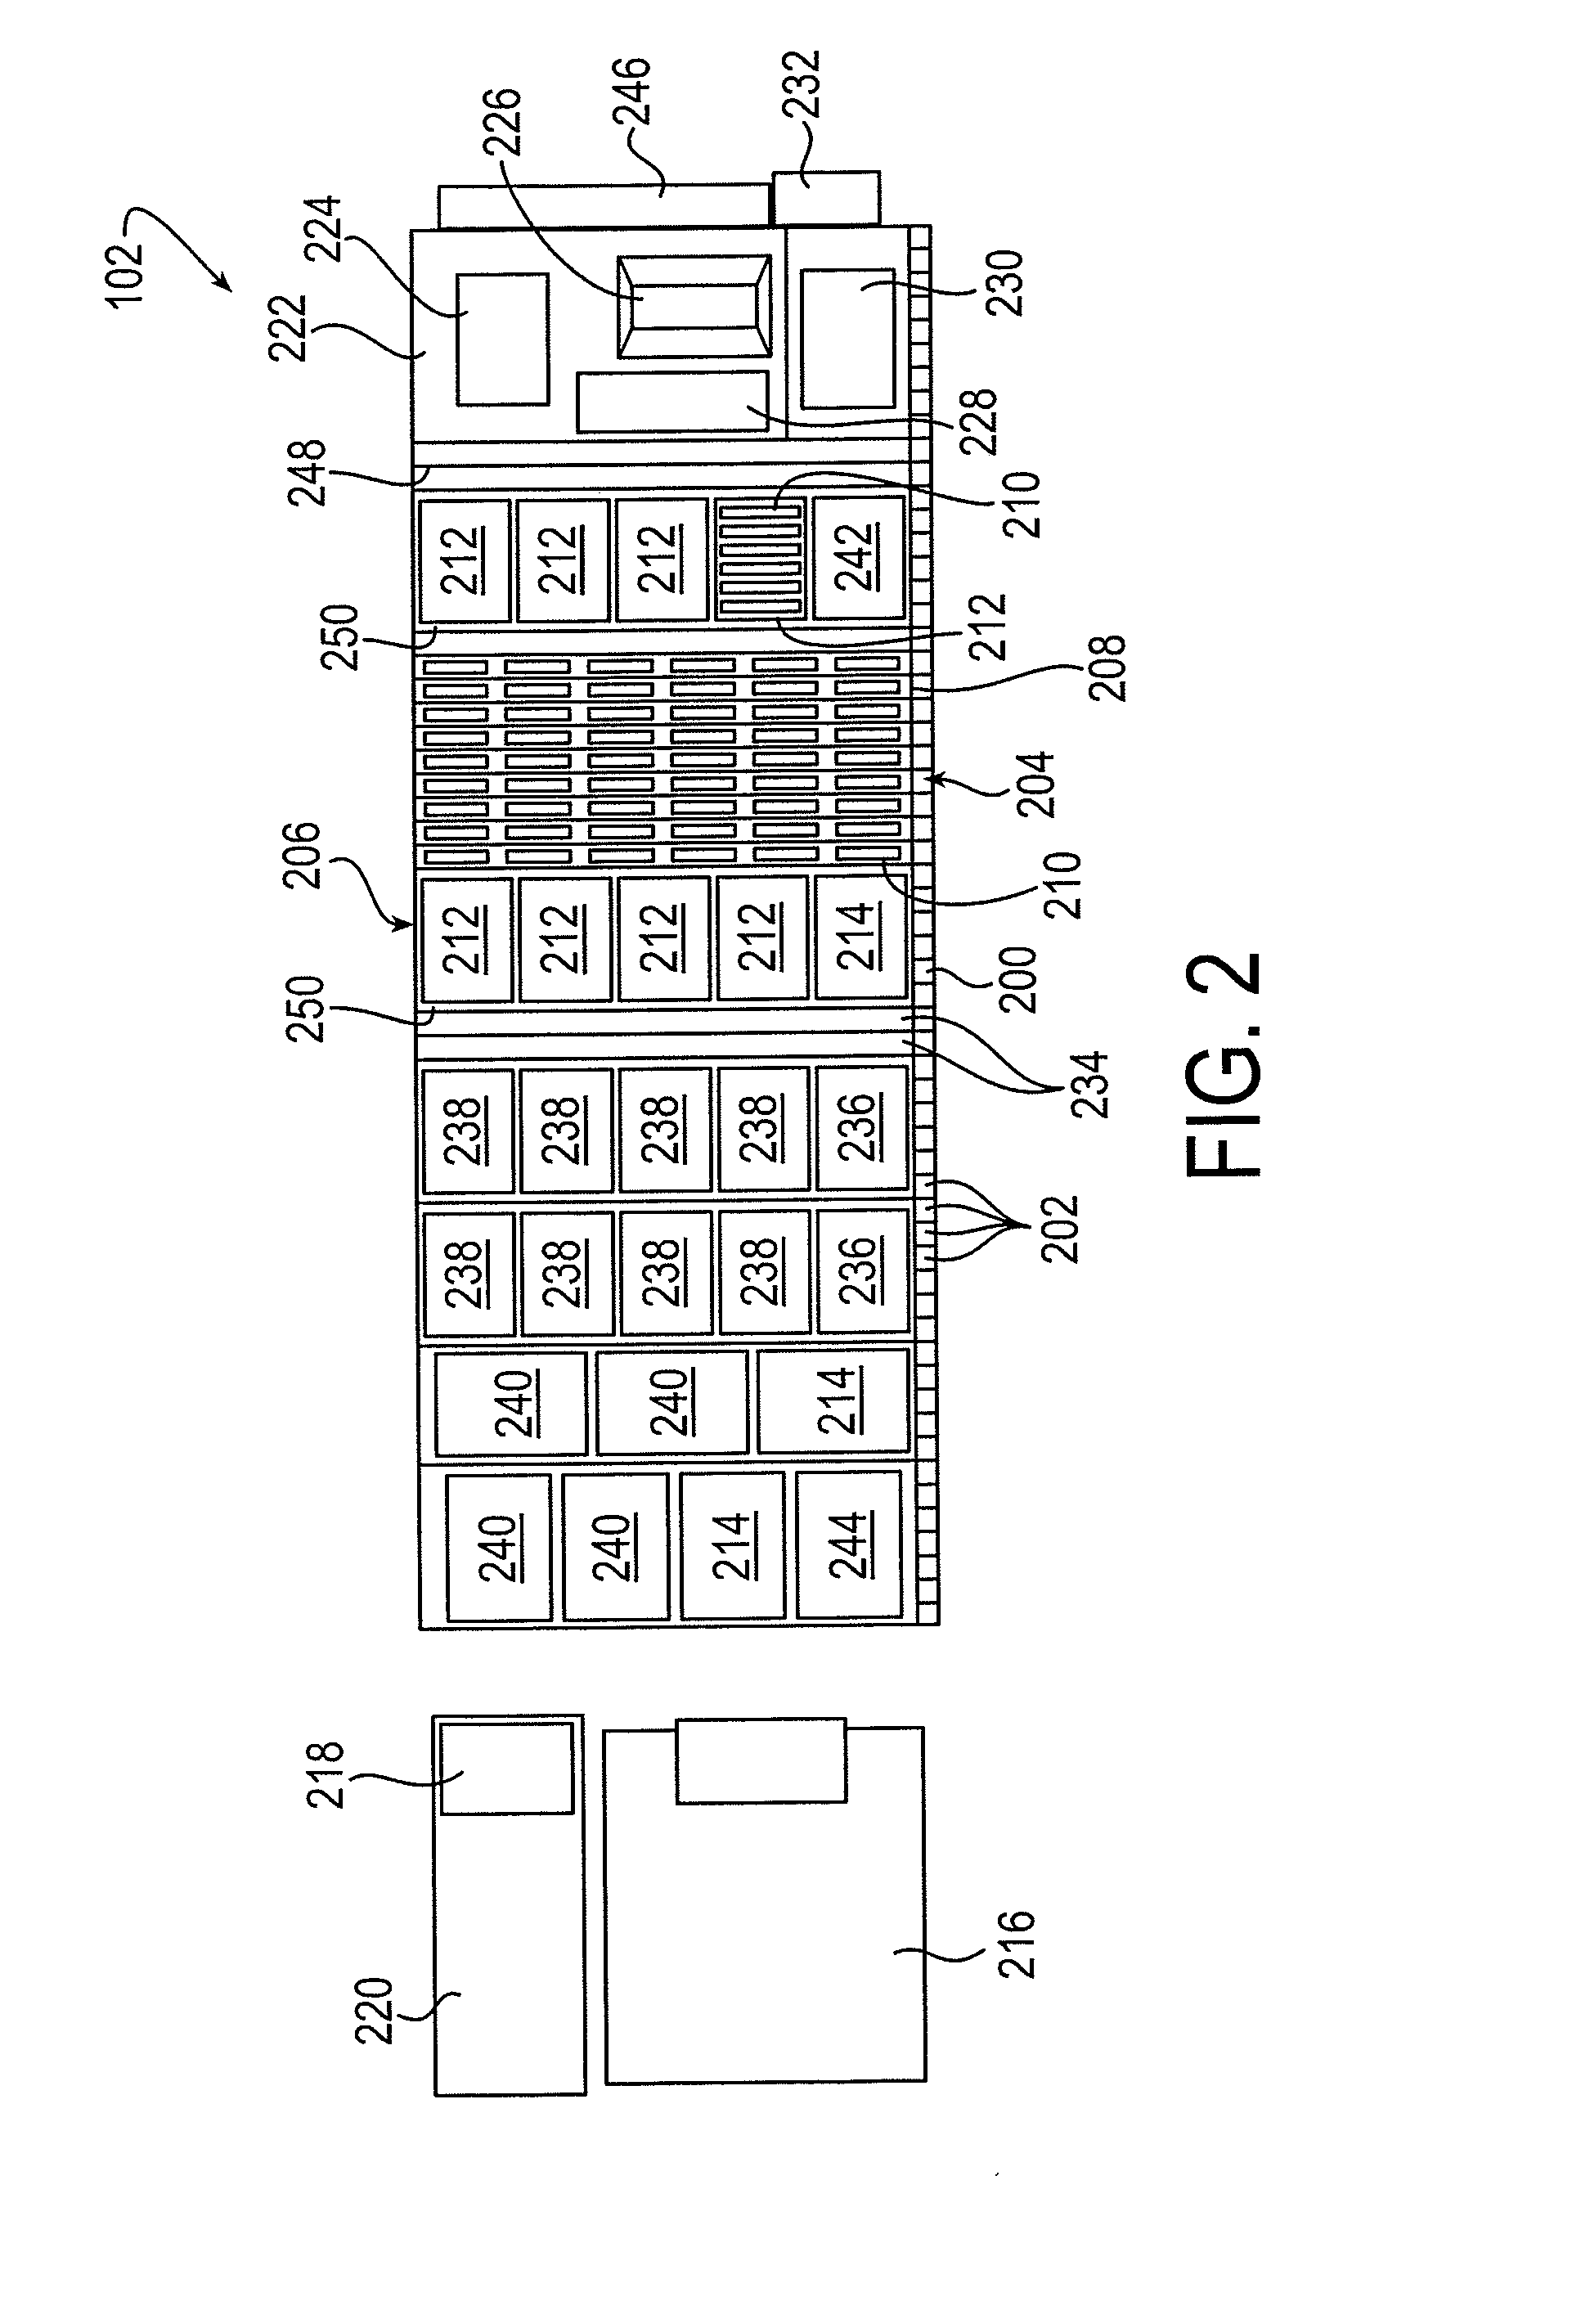 Sample processing apparatus and methods